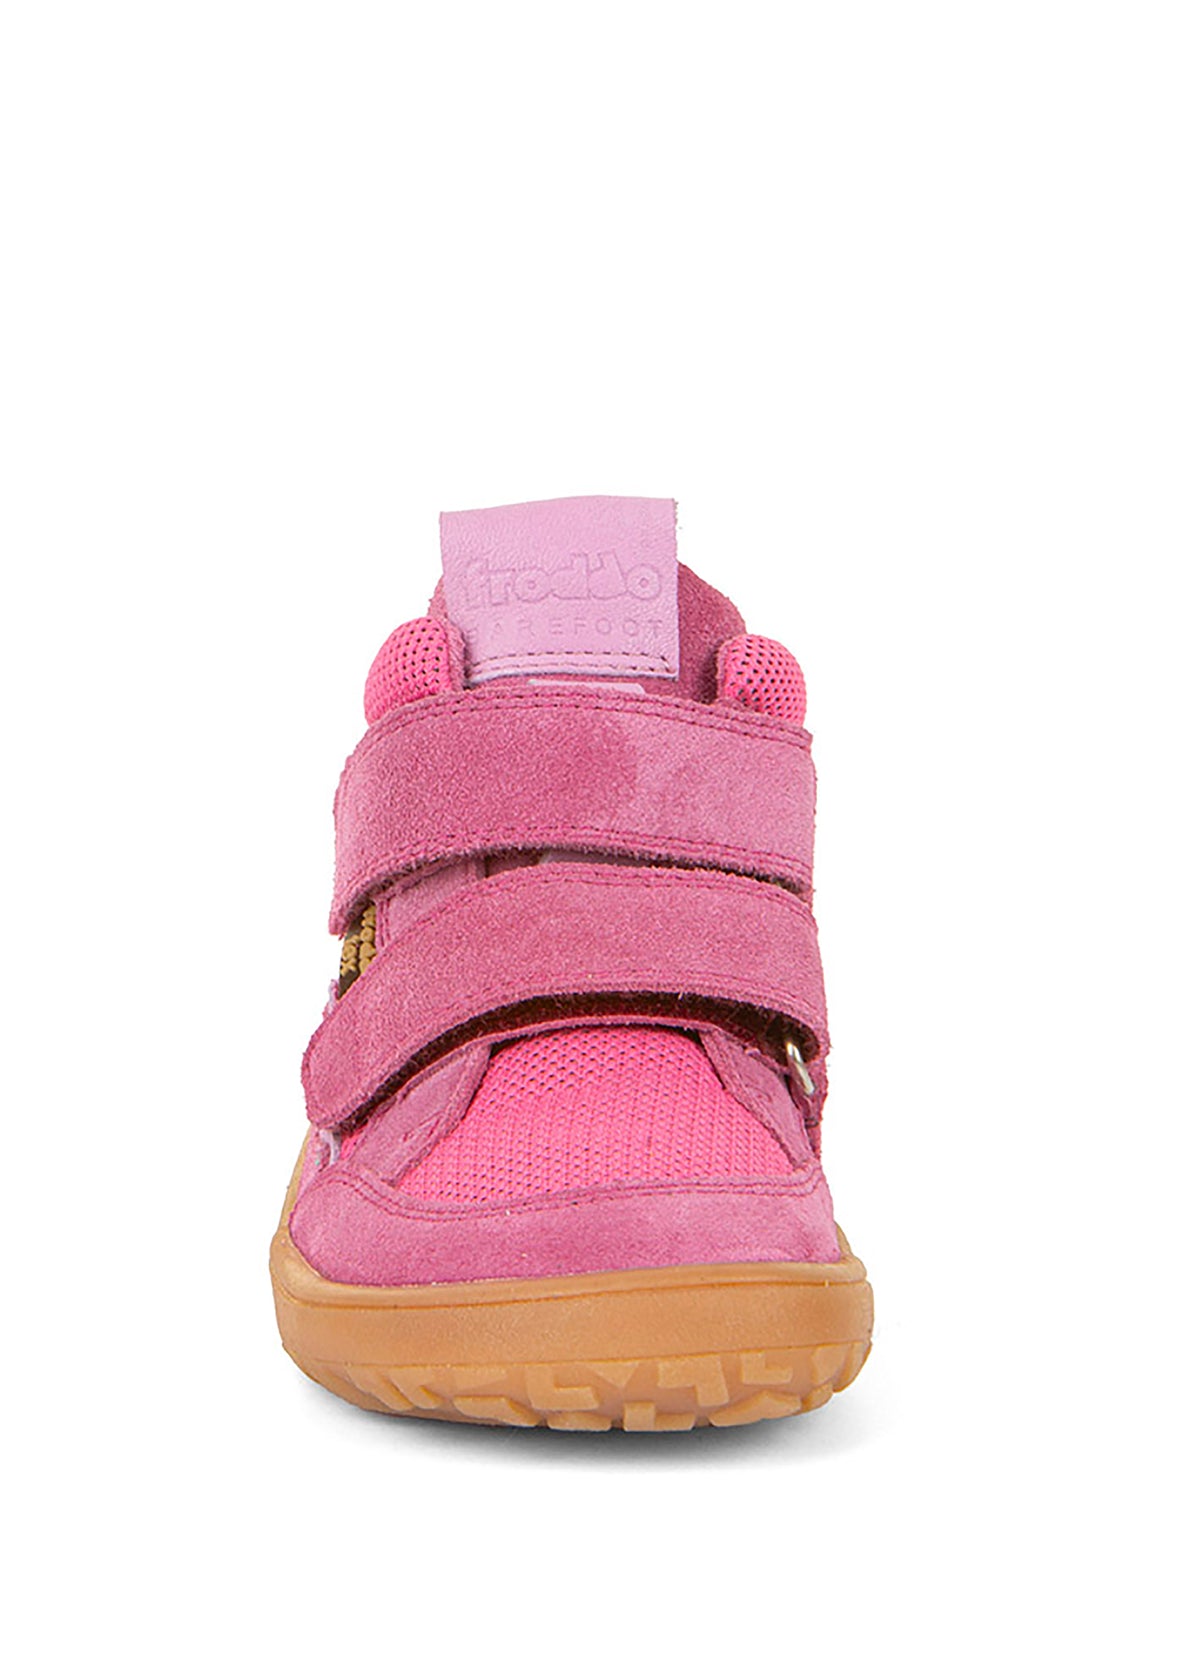 Barefoot sneakers with handles - mid-season shoes, Spring-TEX, pink